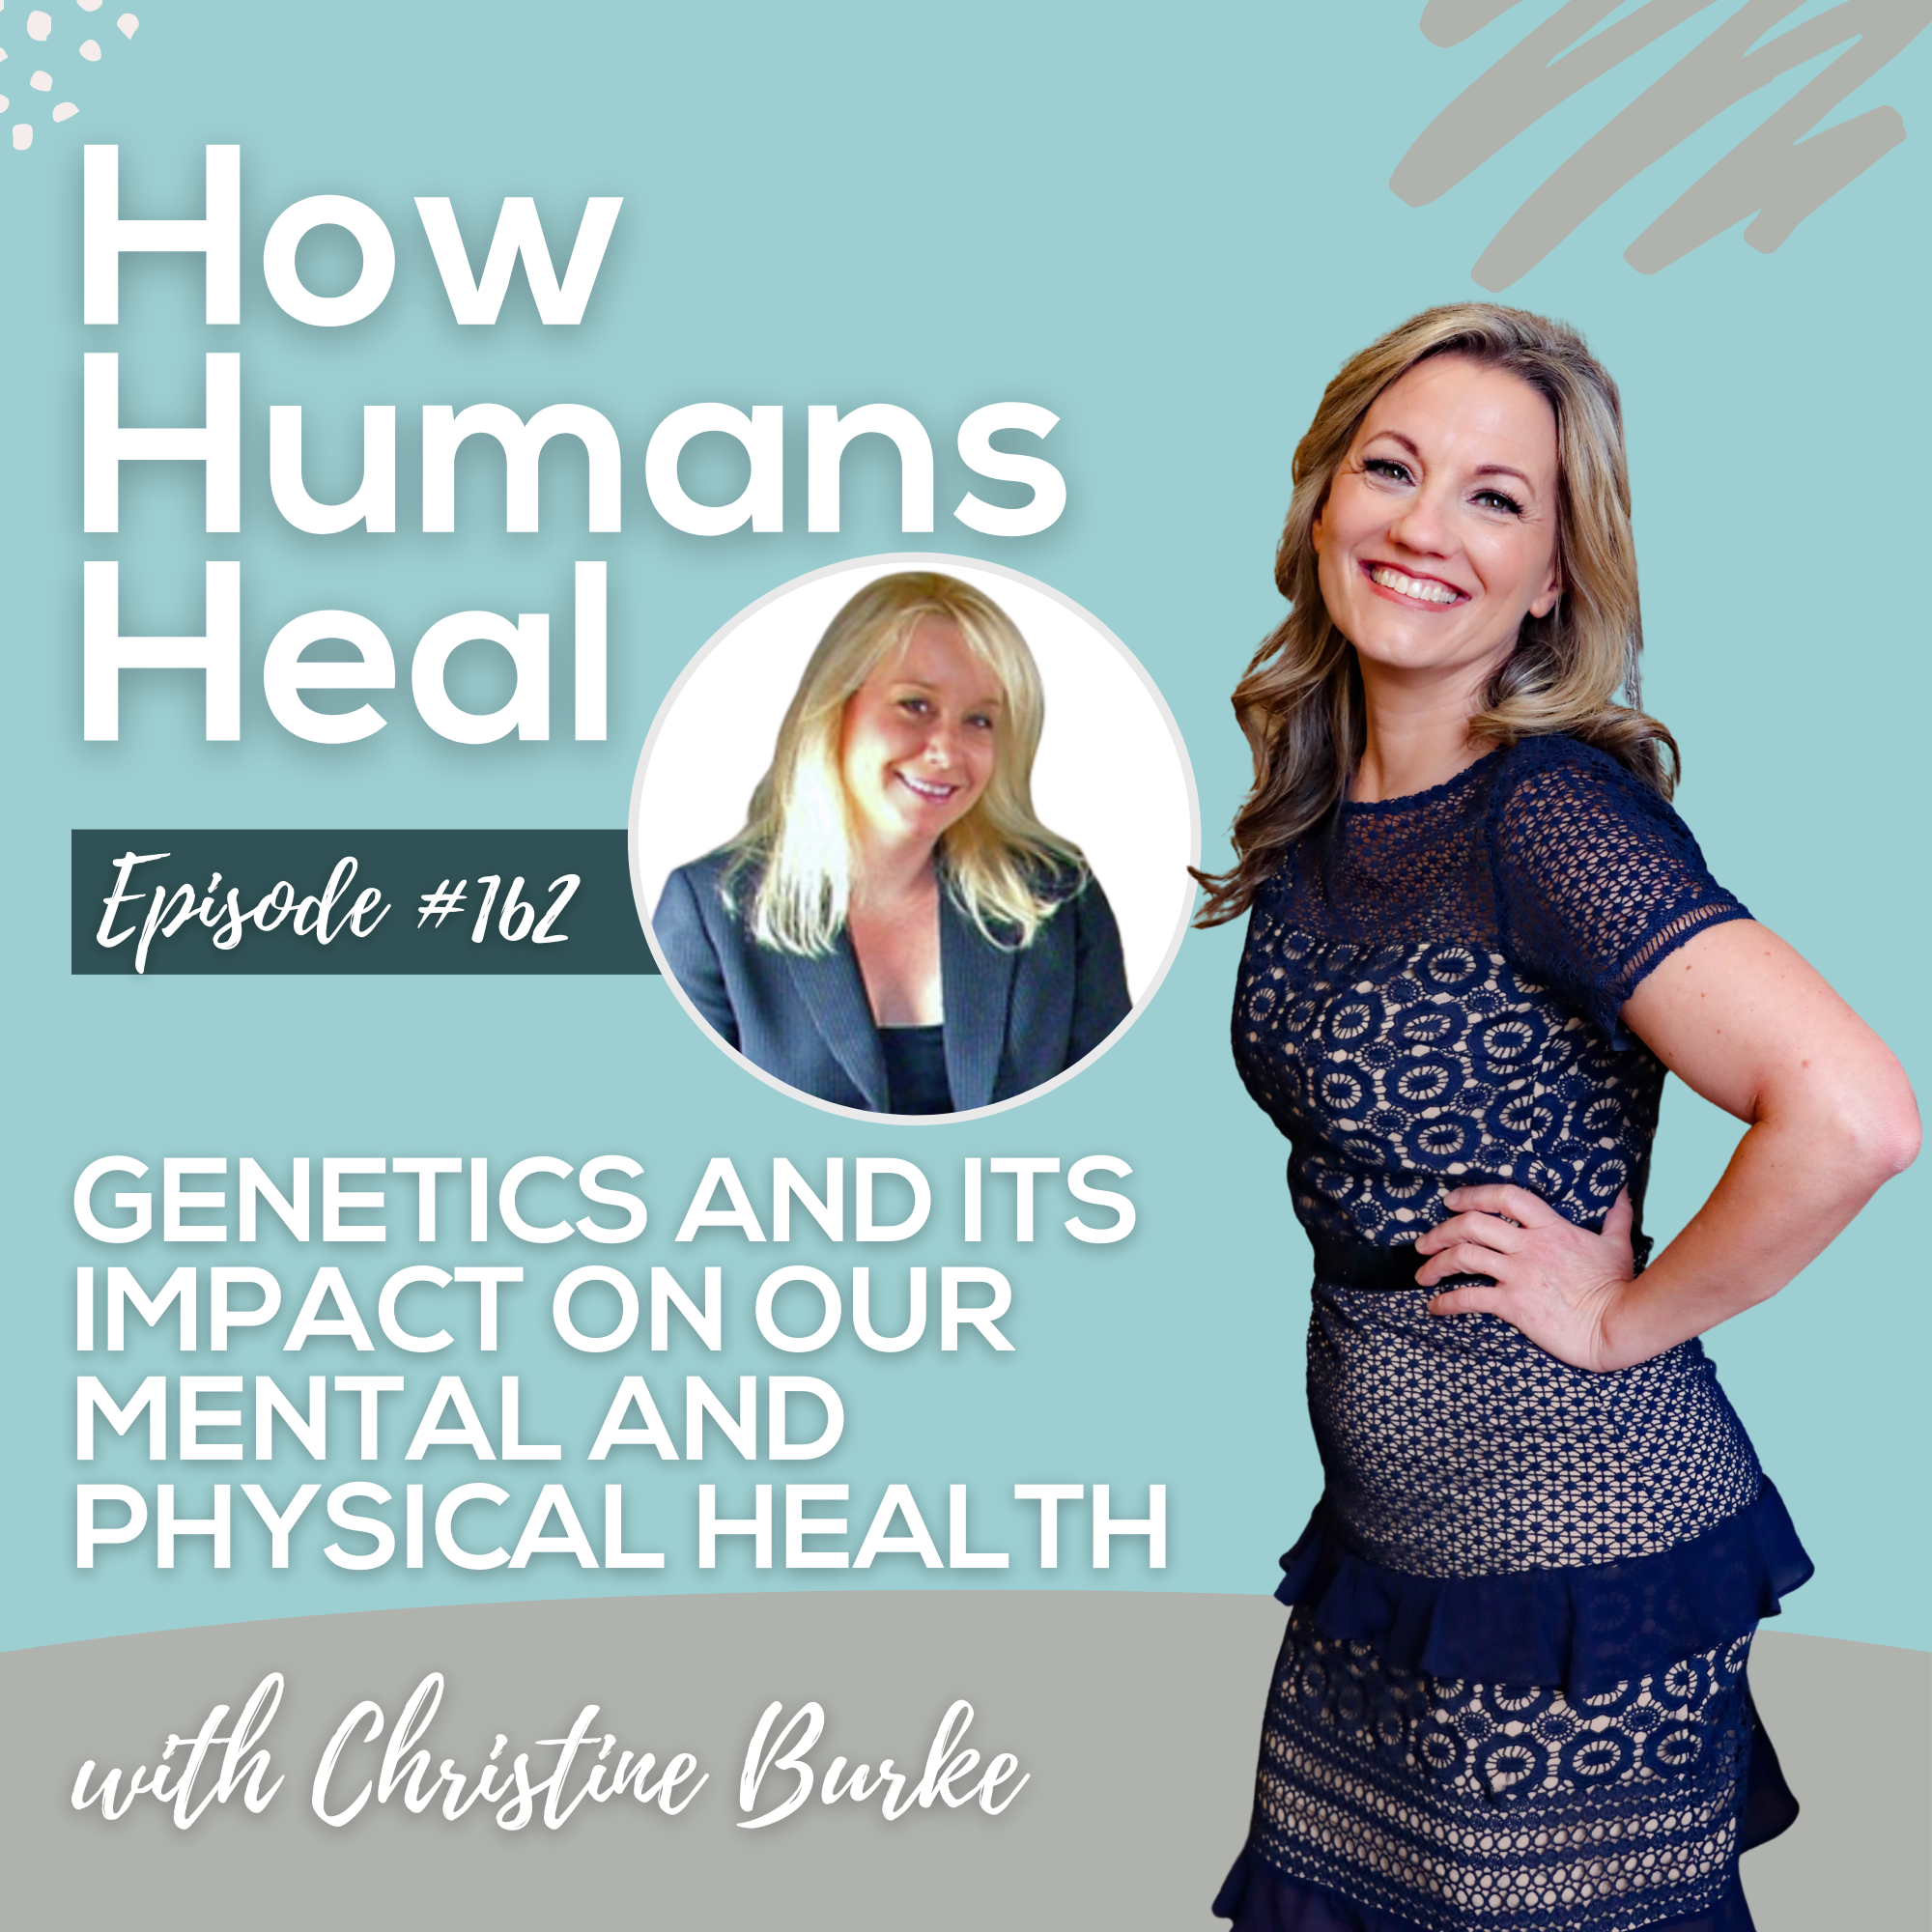 Genetics play an important role in our mental and physical health. Christine Burke joins Dr. Doni to talk about how understanding your genetic variations can make a significant difference in your health. 